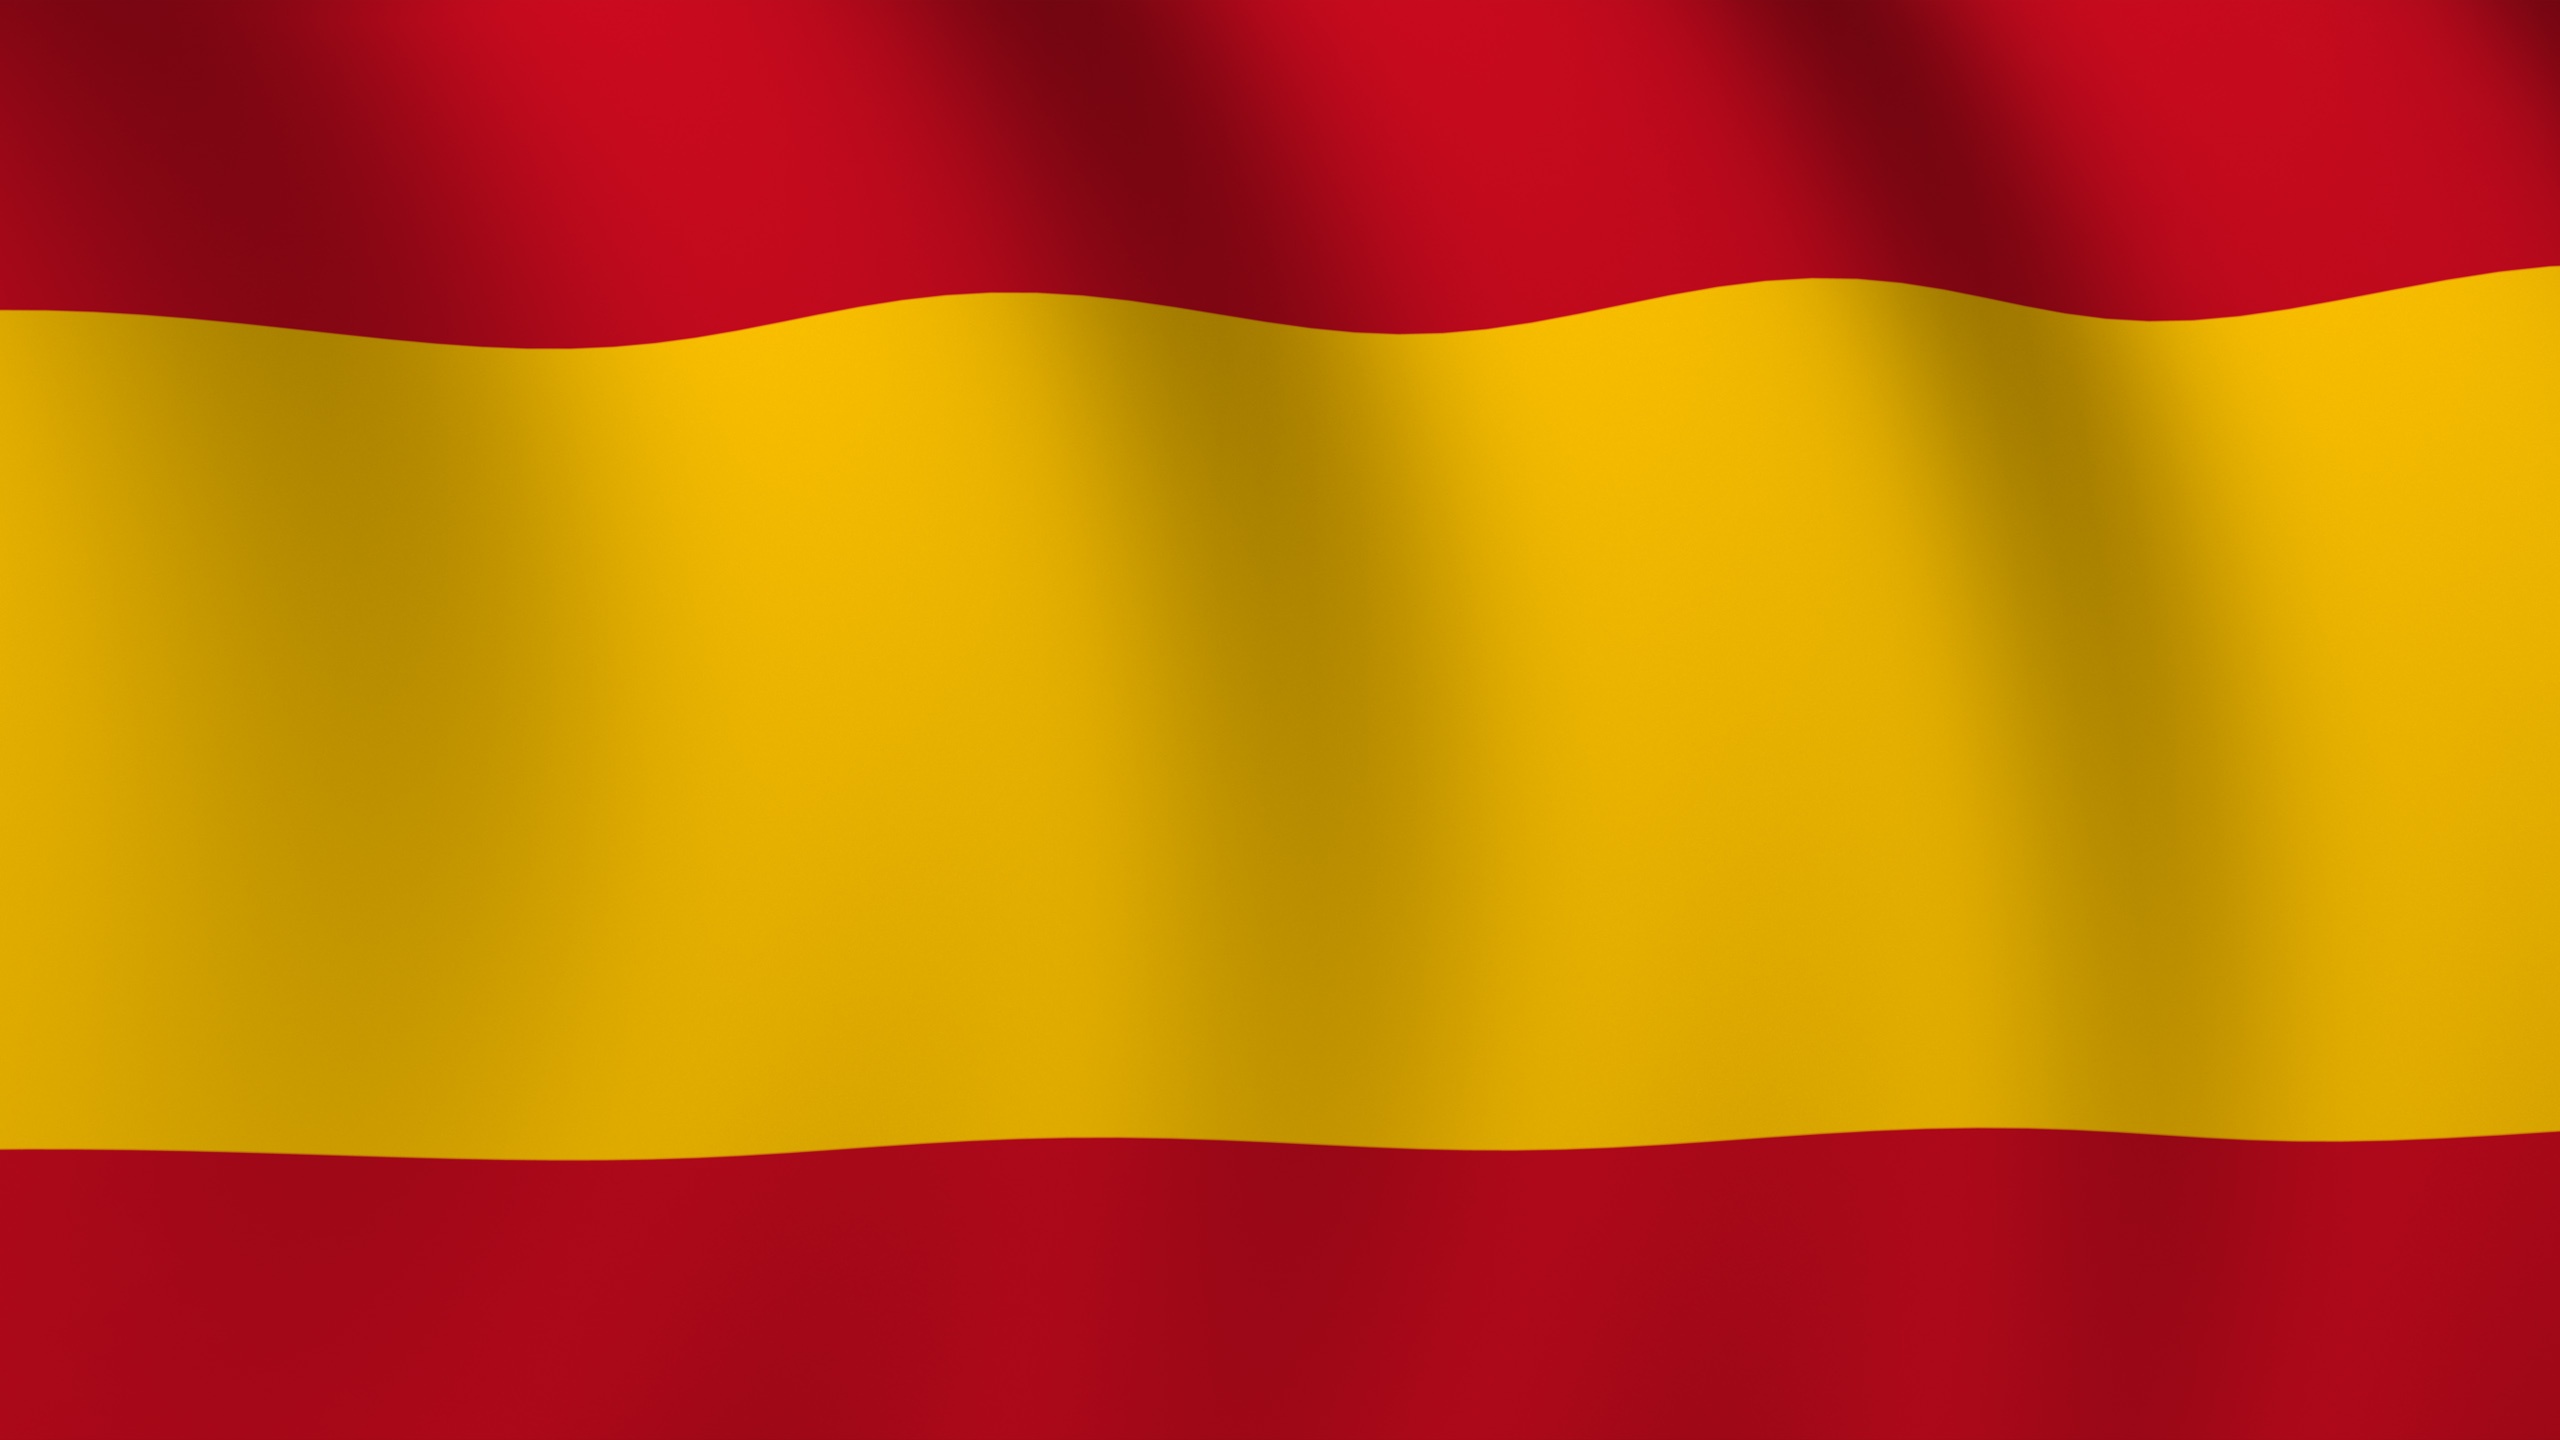 Spain Flag Image Crazy Gallery